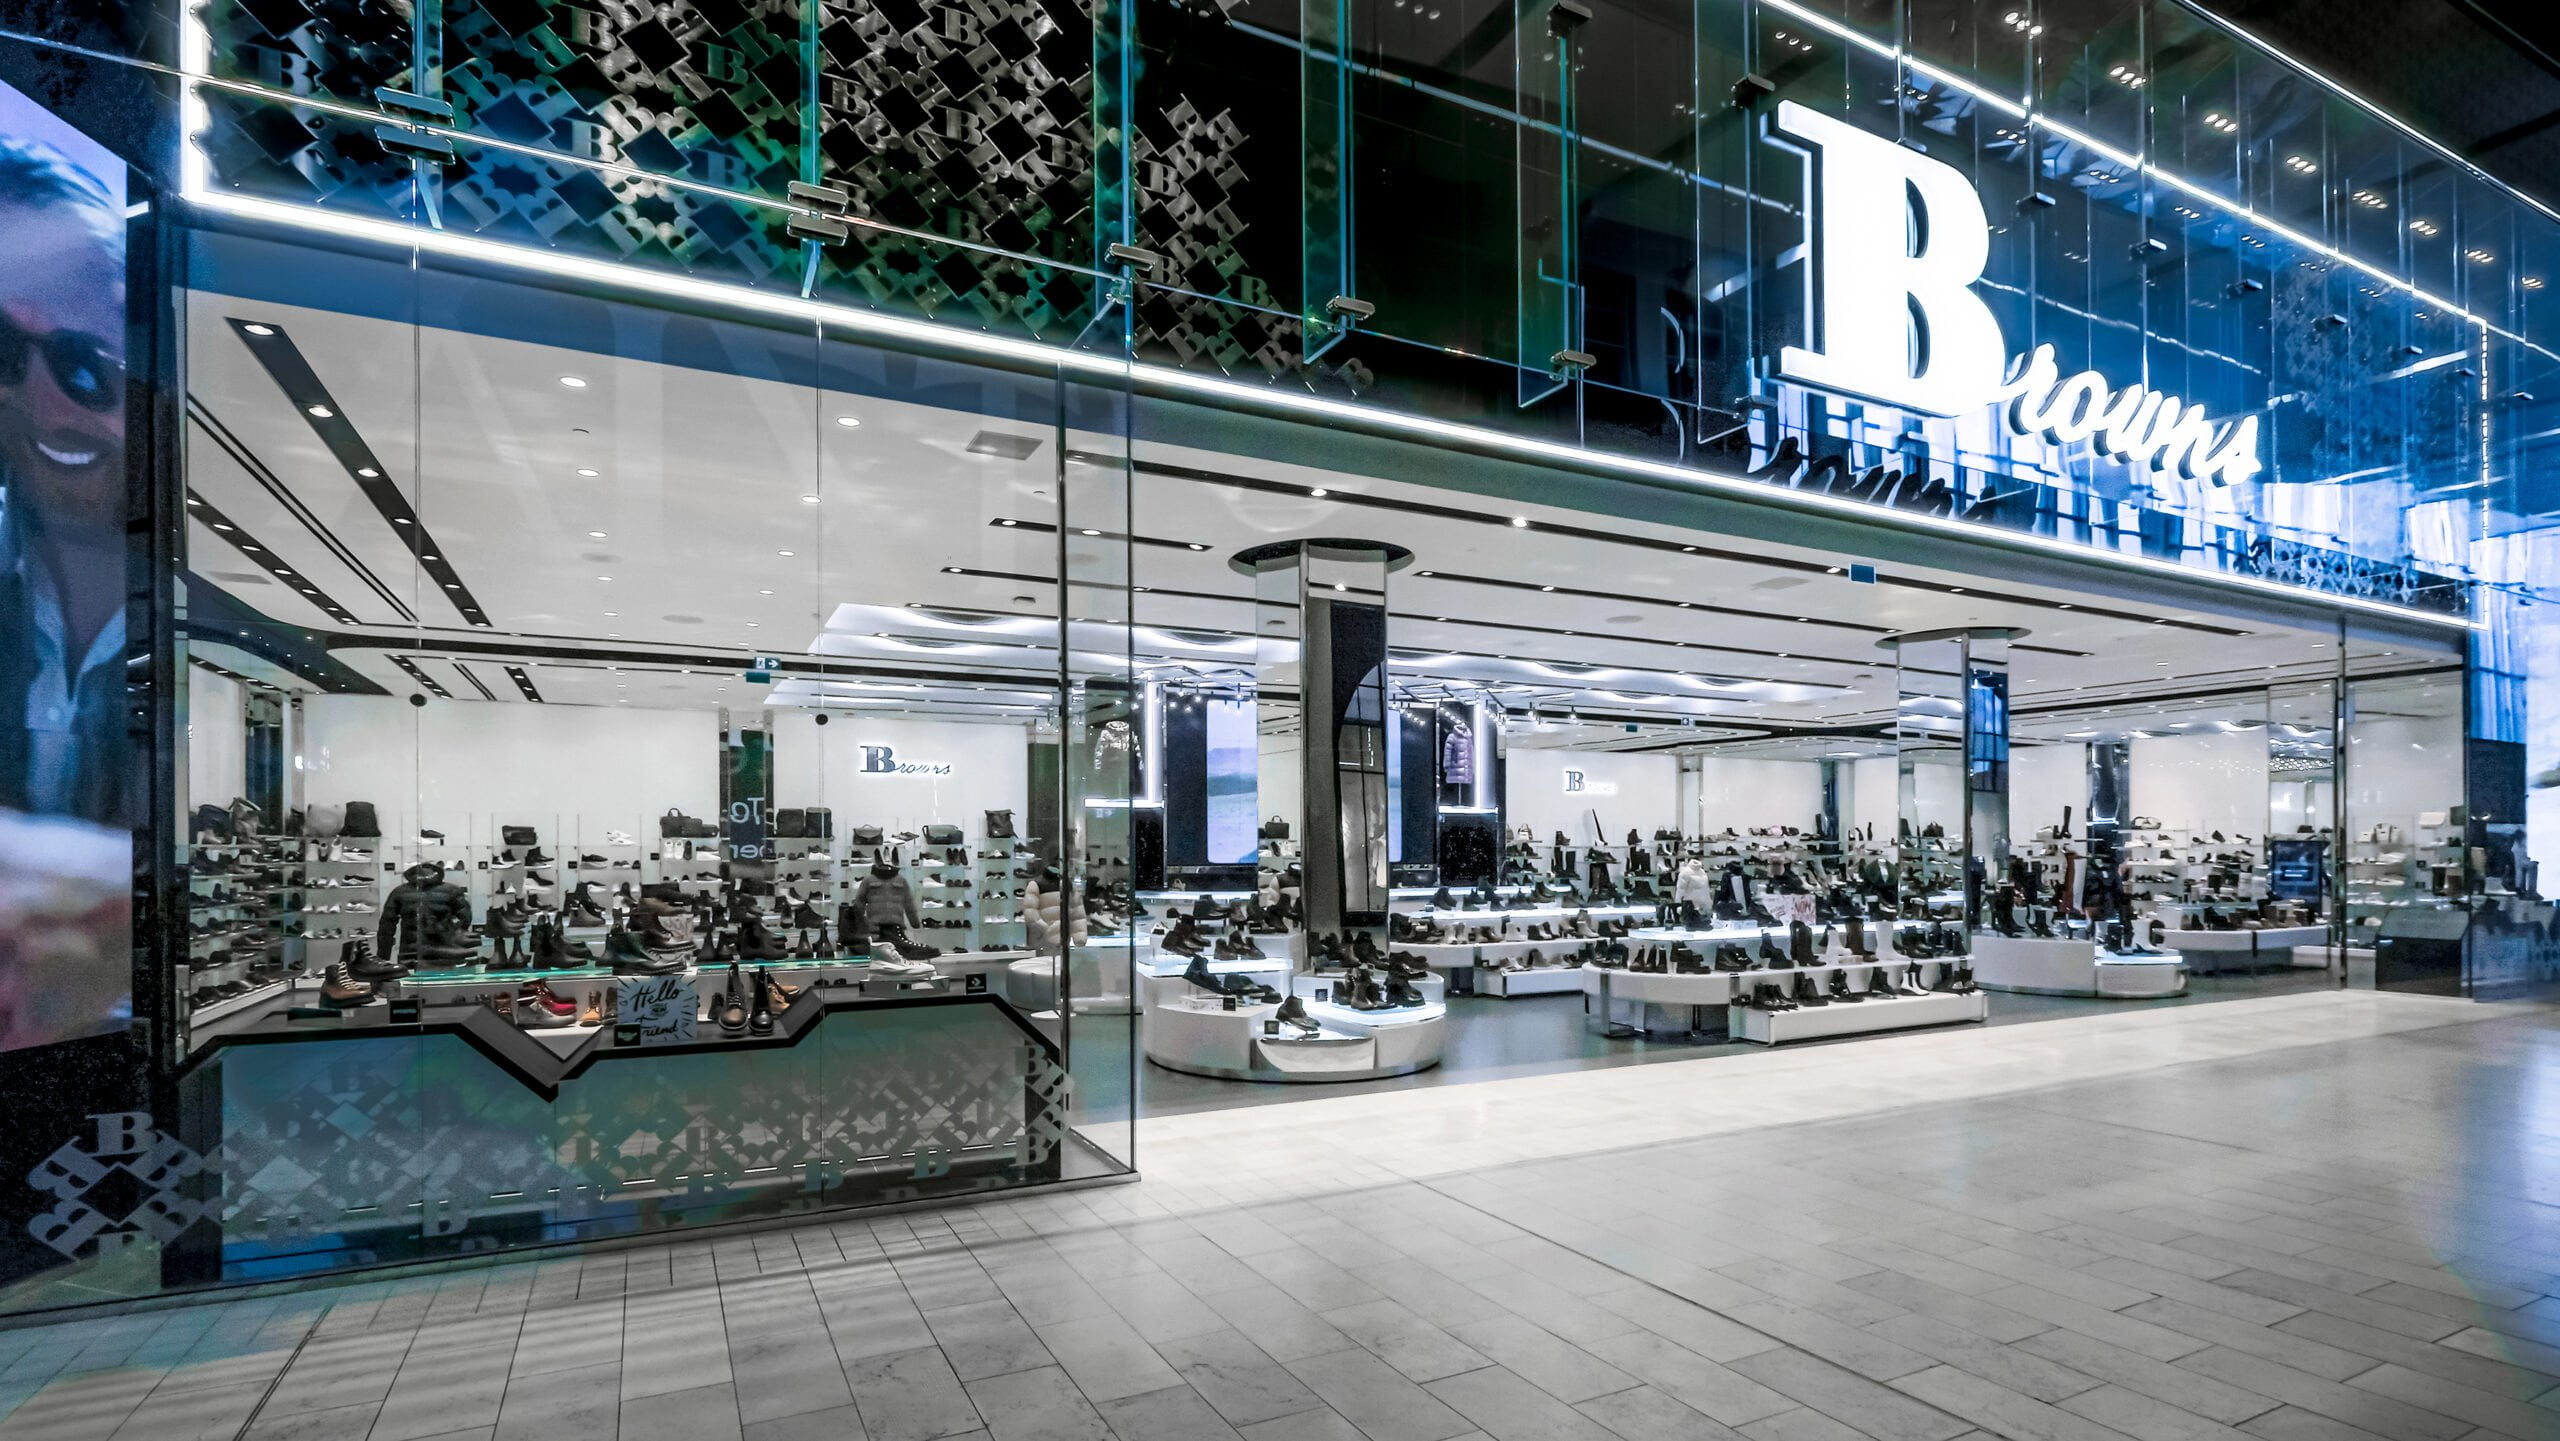 Browns Shoes Opens Impressive Flagship Store at Toronto’s Yorkdale